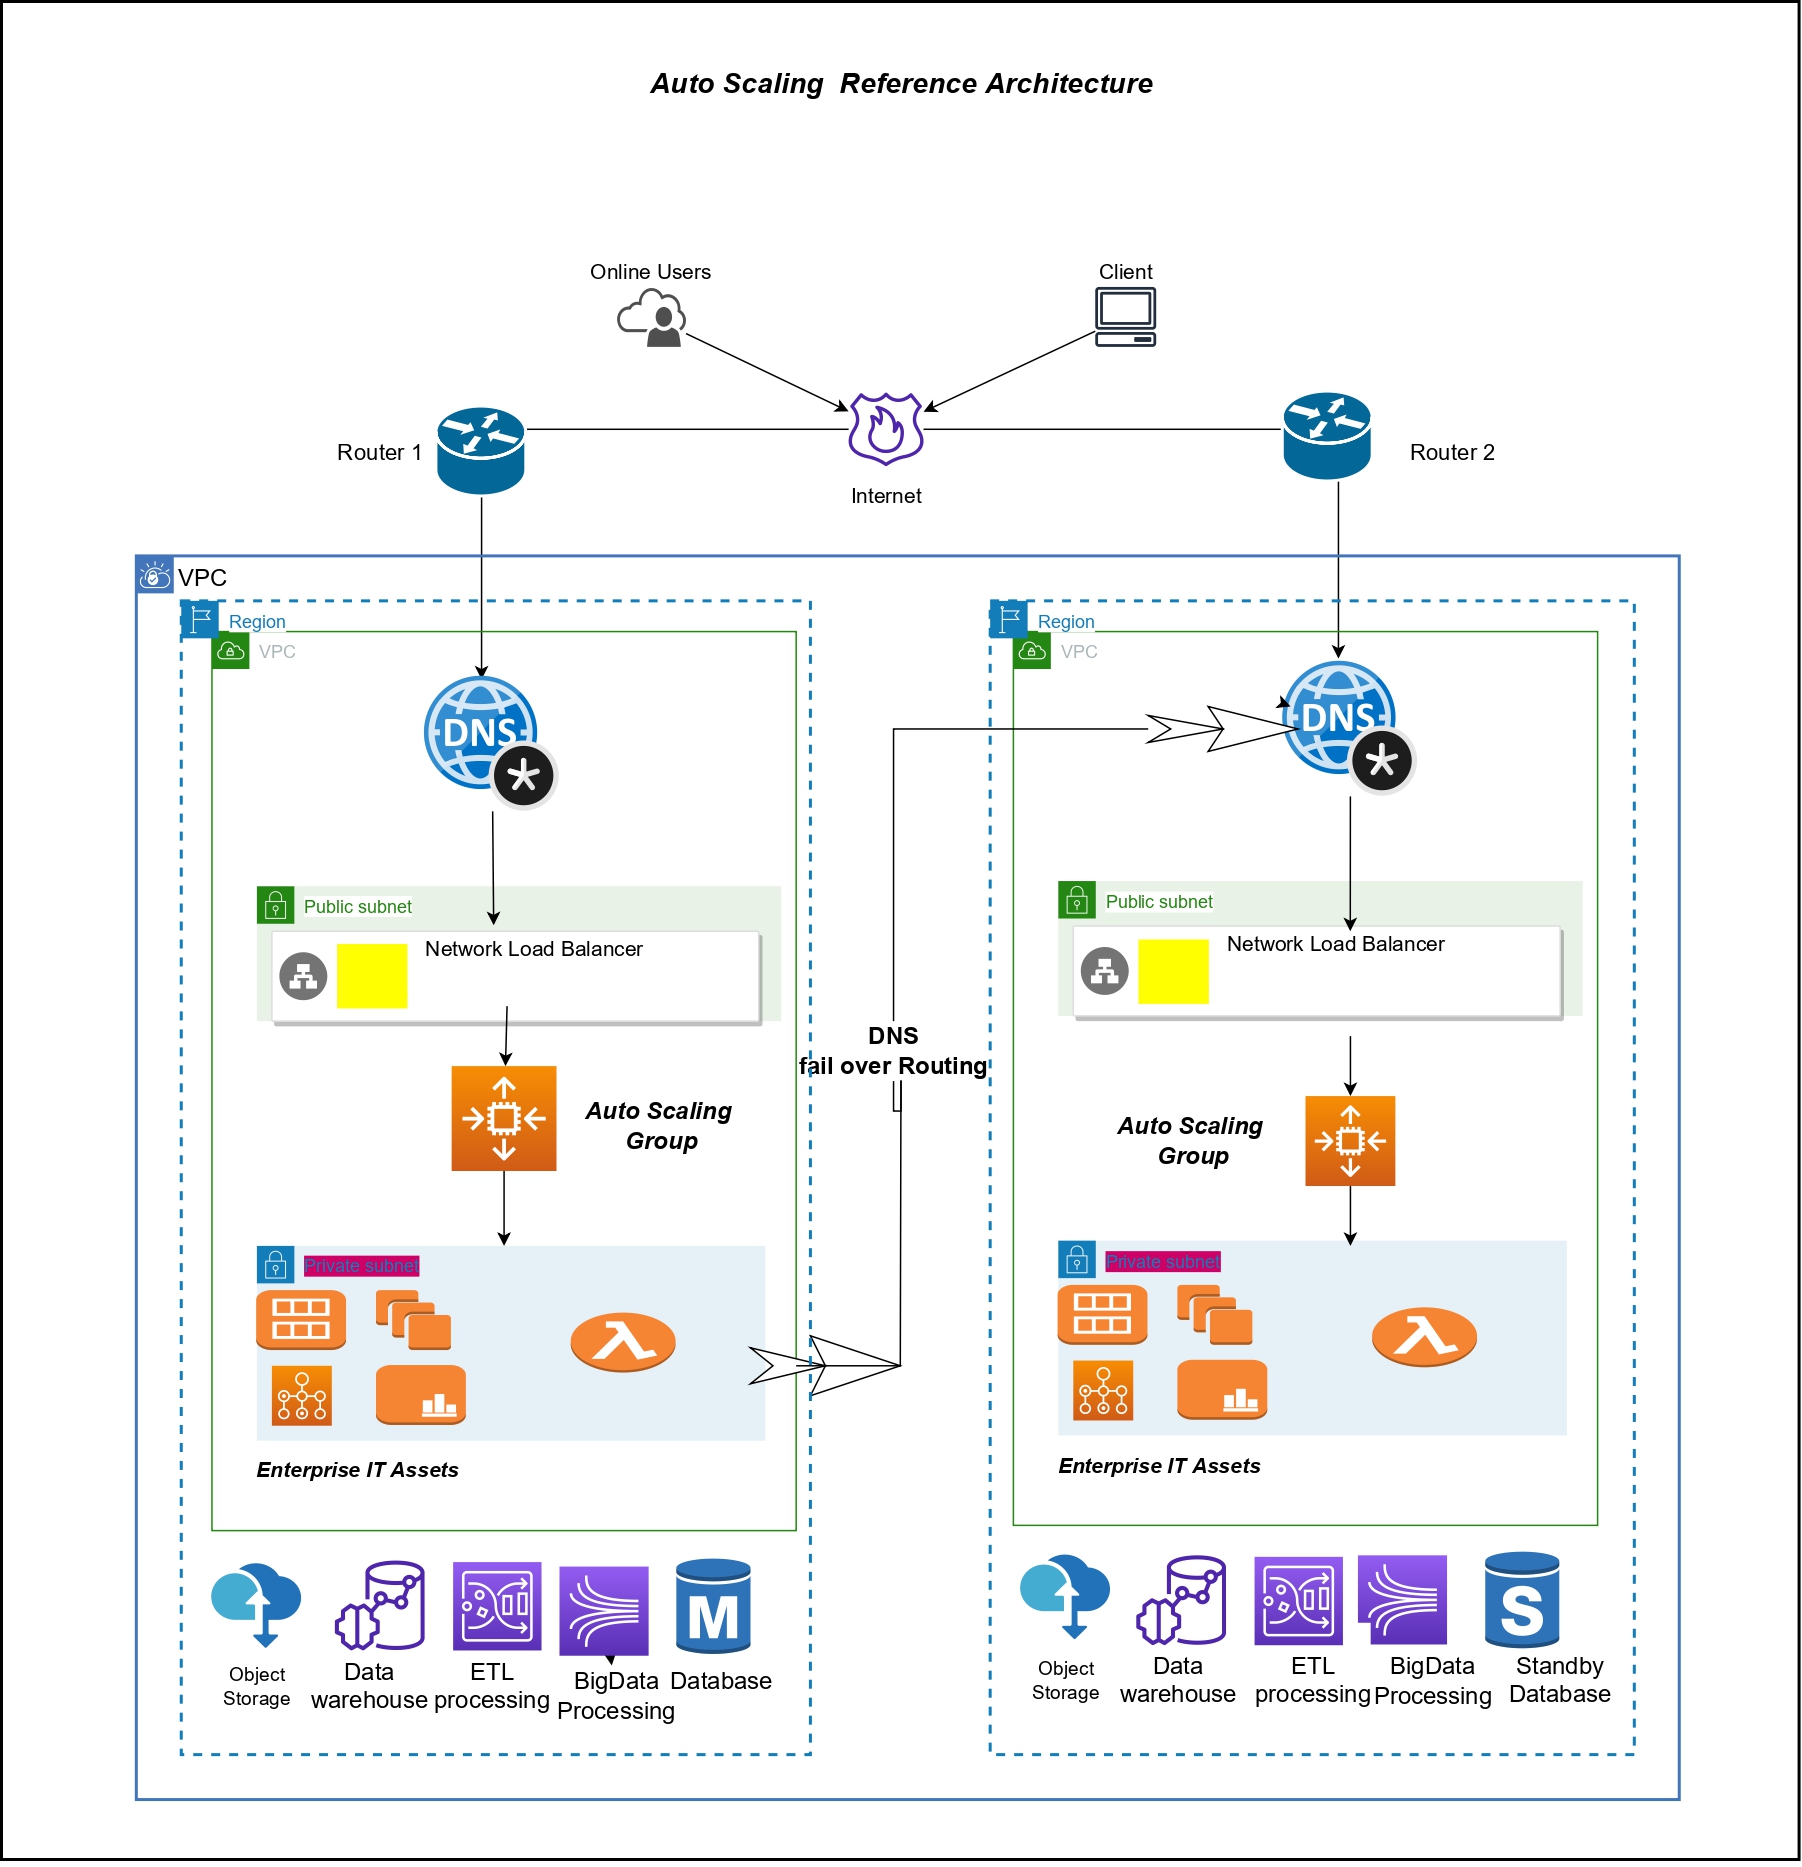 Auto Scaling Reference Architecture_upi cloud9prime blog.jpg